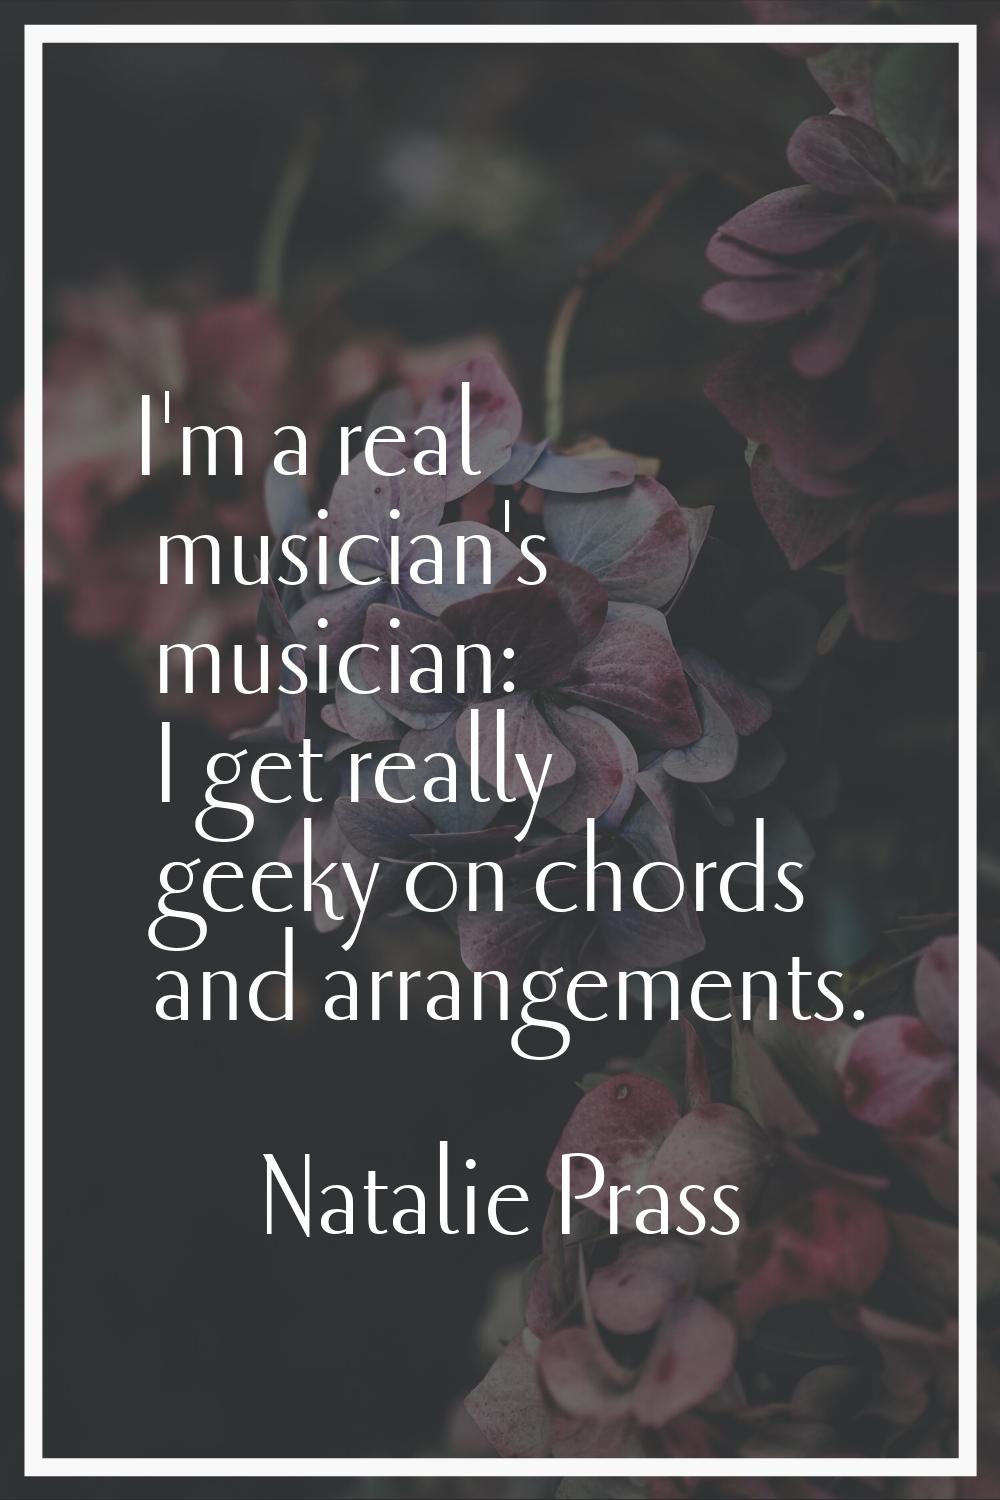 I'm a real musician's musician: I get really geeky on chords and arrangements.